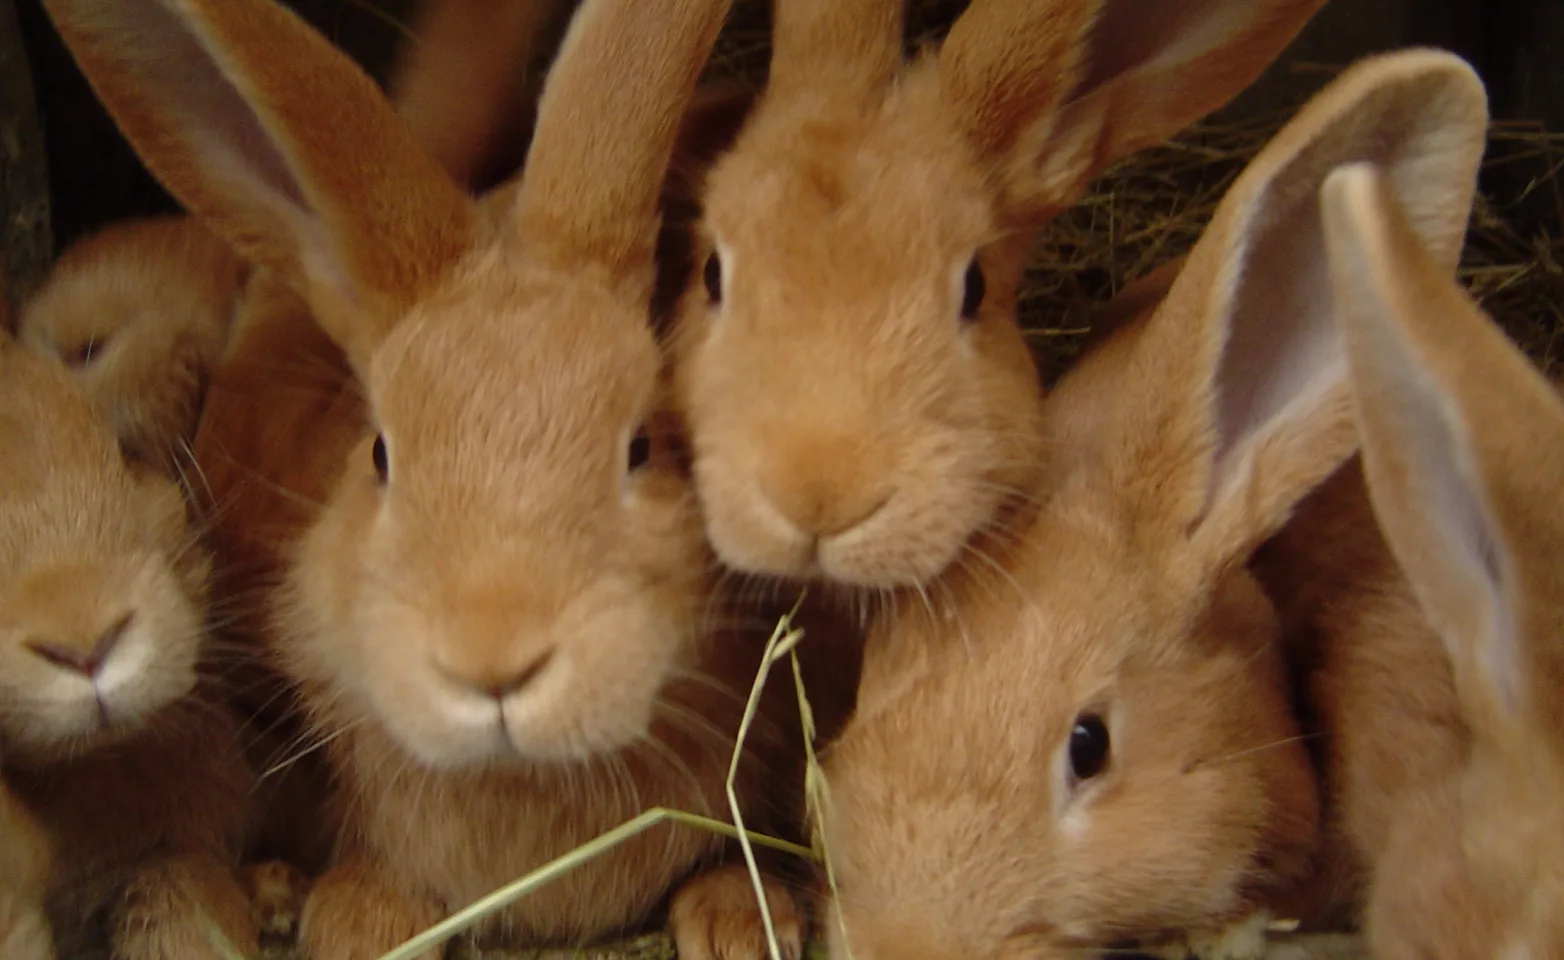 Four rabbits sit in hay